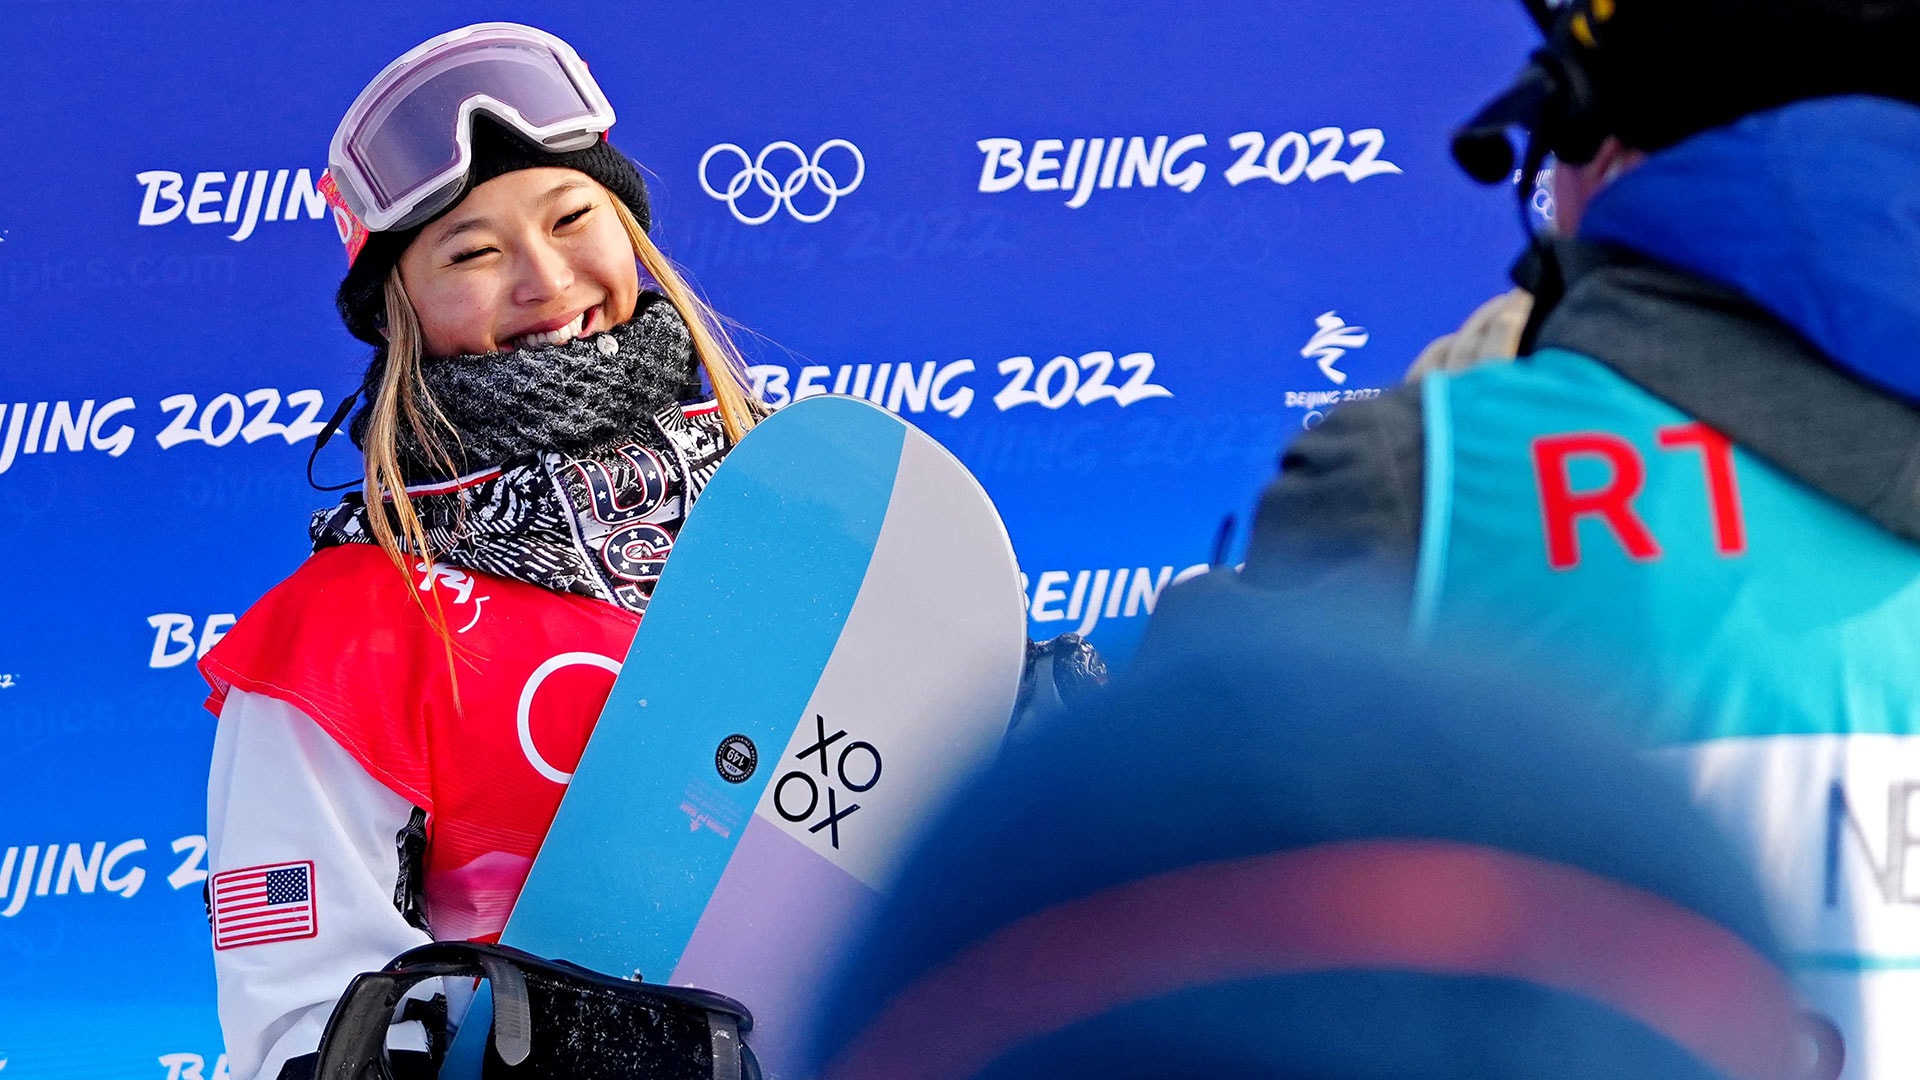 LIVE UPDATES Chloe Kim, Nathan Chen win gold on Day 6 of Winter Olympics